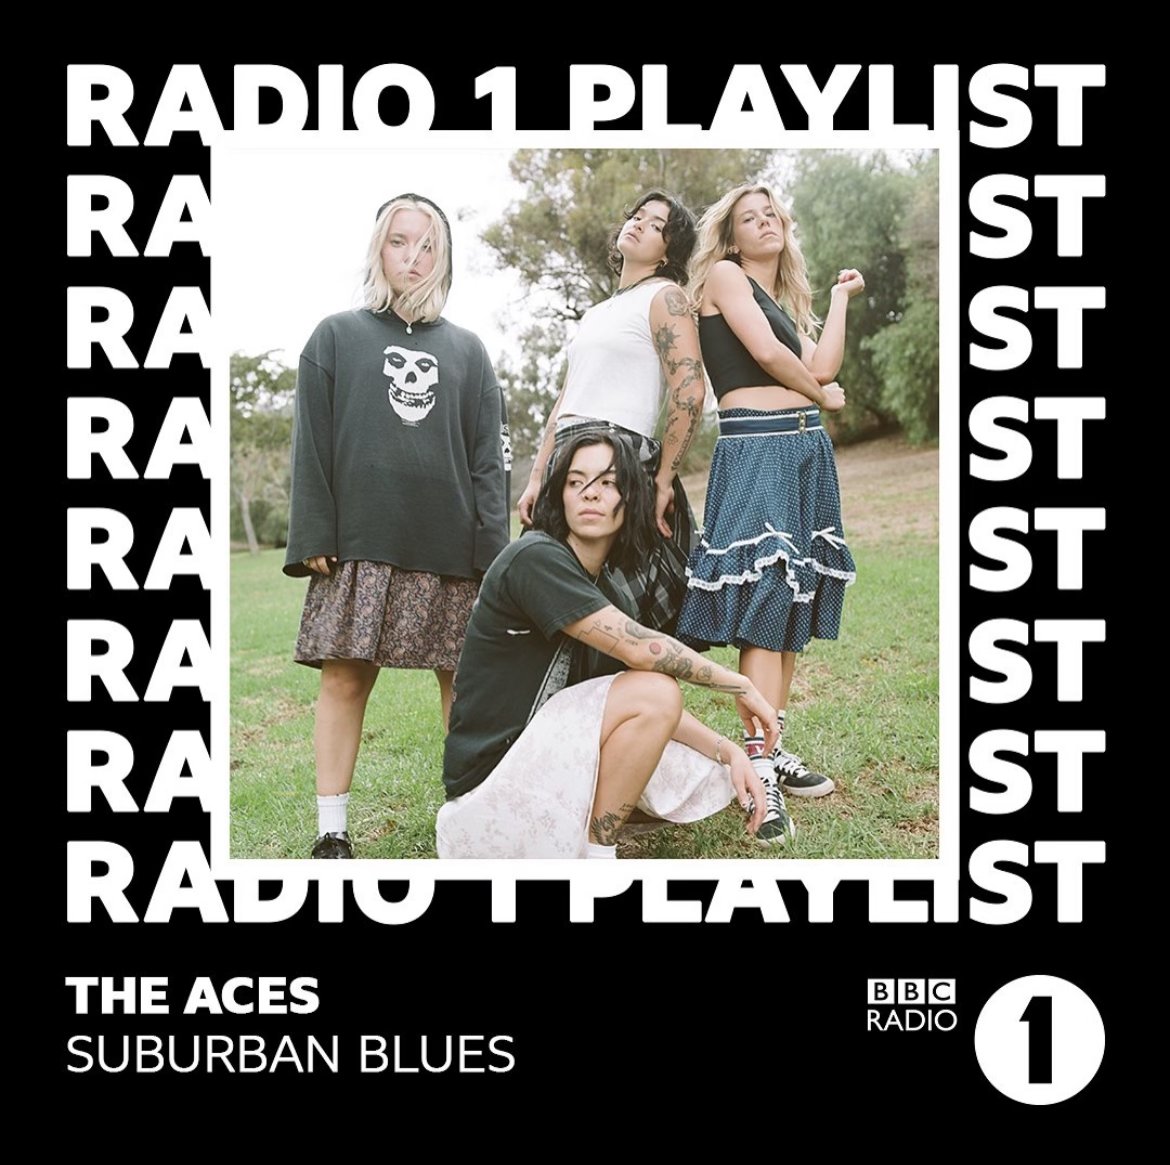 SUBURBAN BLUES IS OFFICIALLY PLAYING ON BBC RADIO 1!!! We have been completely blown away at the love we feel over here in the UK/Europe. Truly this tour, these moments with you, is why we do this. We love you so much, thank you for listening. And THANK YOU @bbcradio1 !!